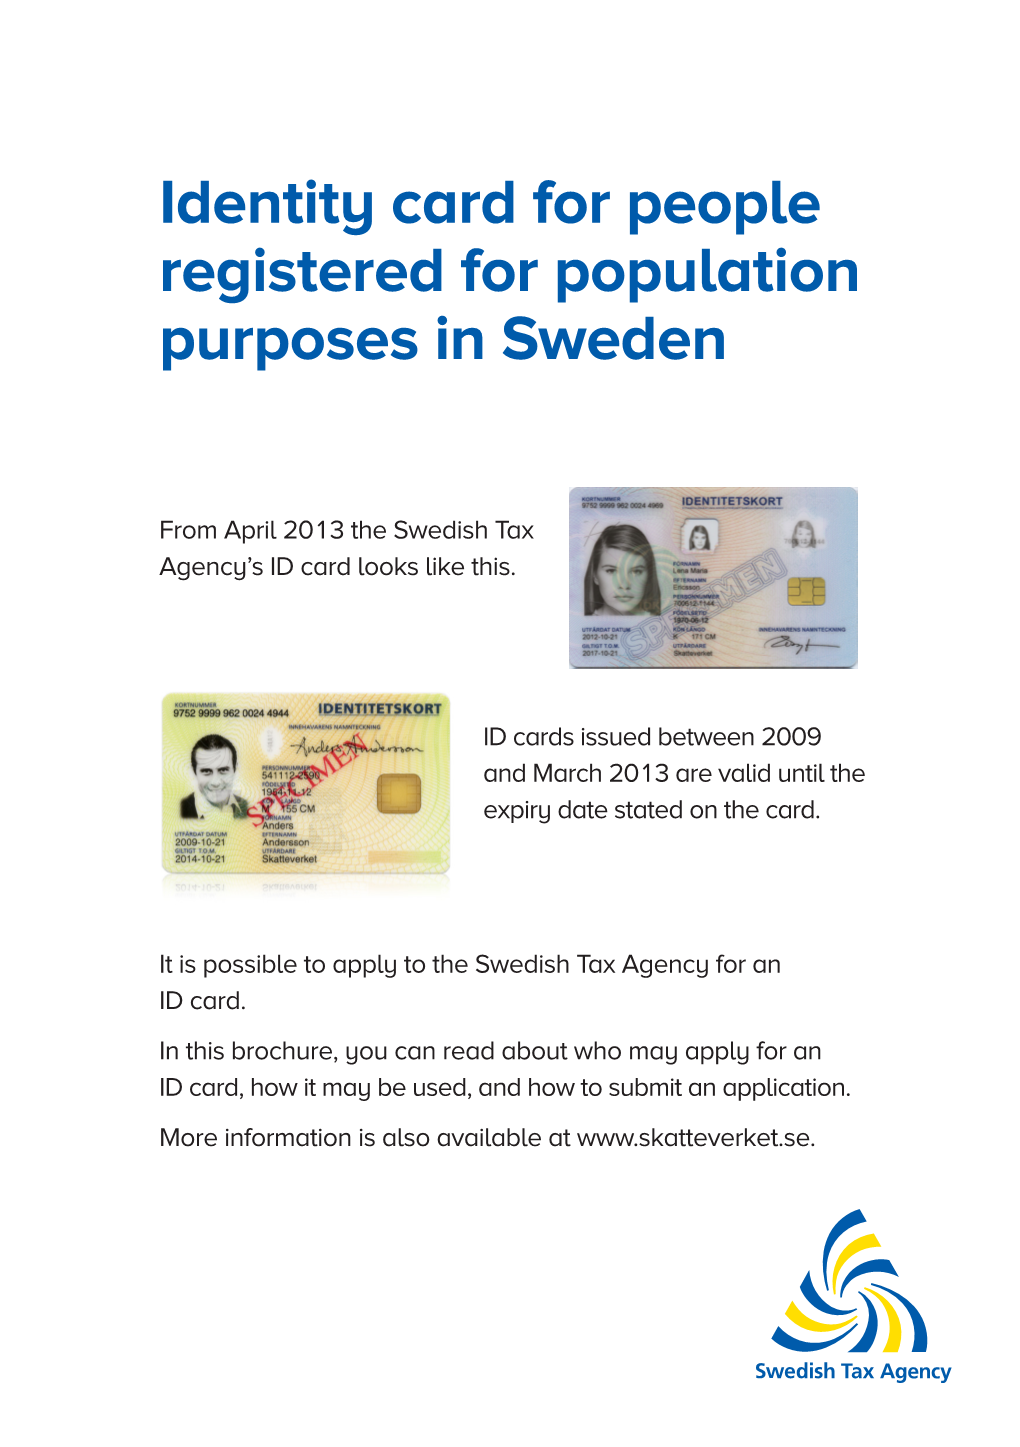 Identity Card for People Registered for Population Purposes in Sweden